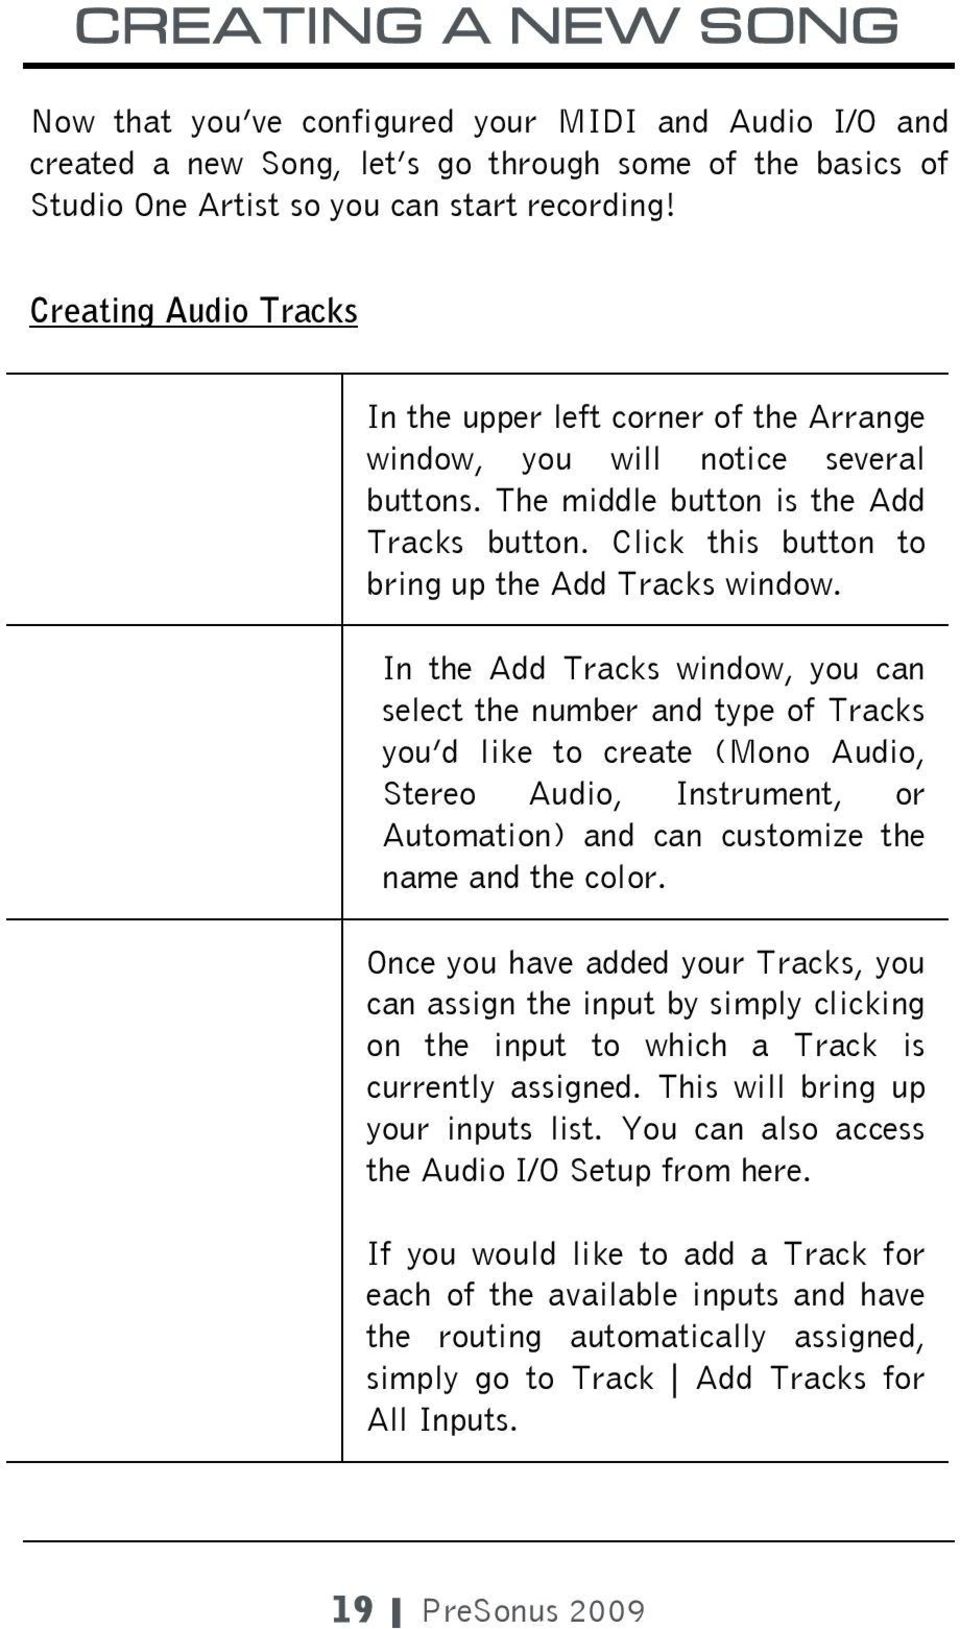 In the Add Tracks window, you can select the number and type of Tracks you d like to create (Mono Audio, Stereo Audio, Instrument, or Automation) and can customize the name and the color.